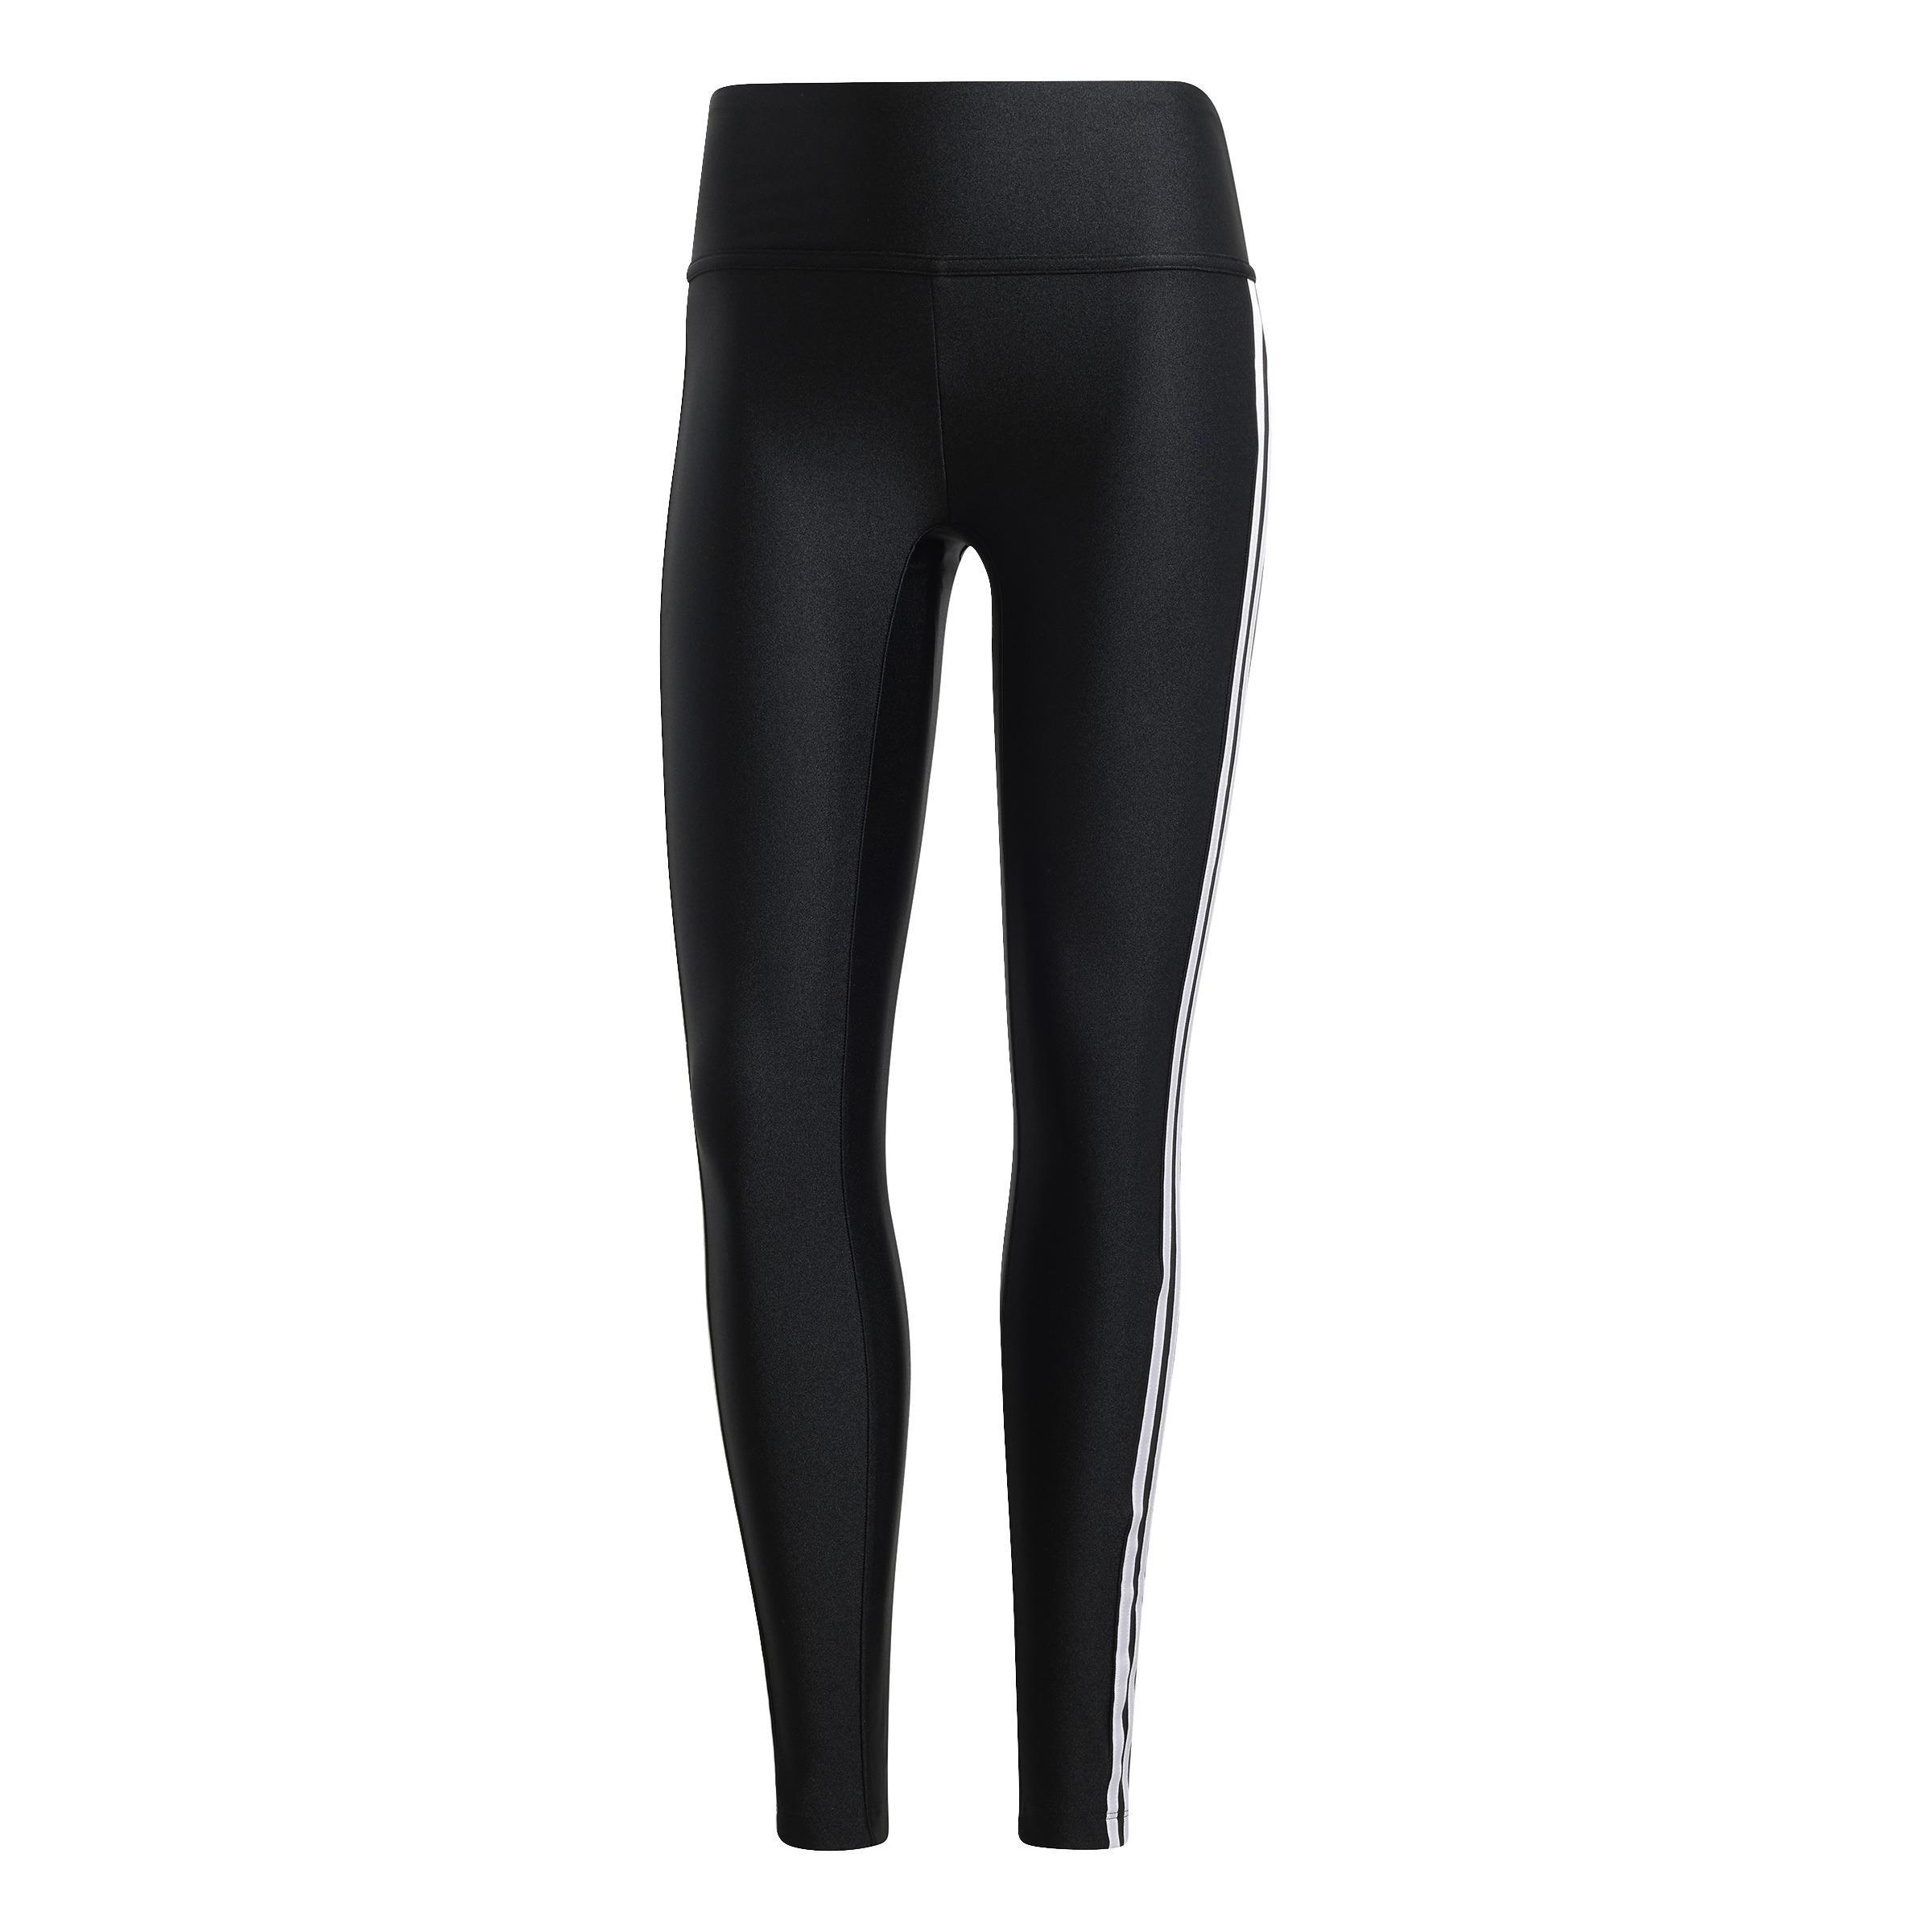 Active Life Black Striped Leggings Size M - $3 (88% Off Retail) - From Sarah